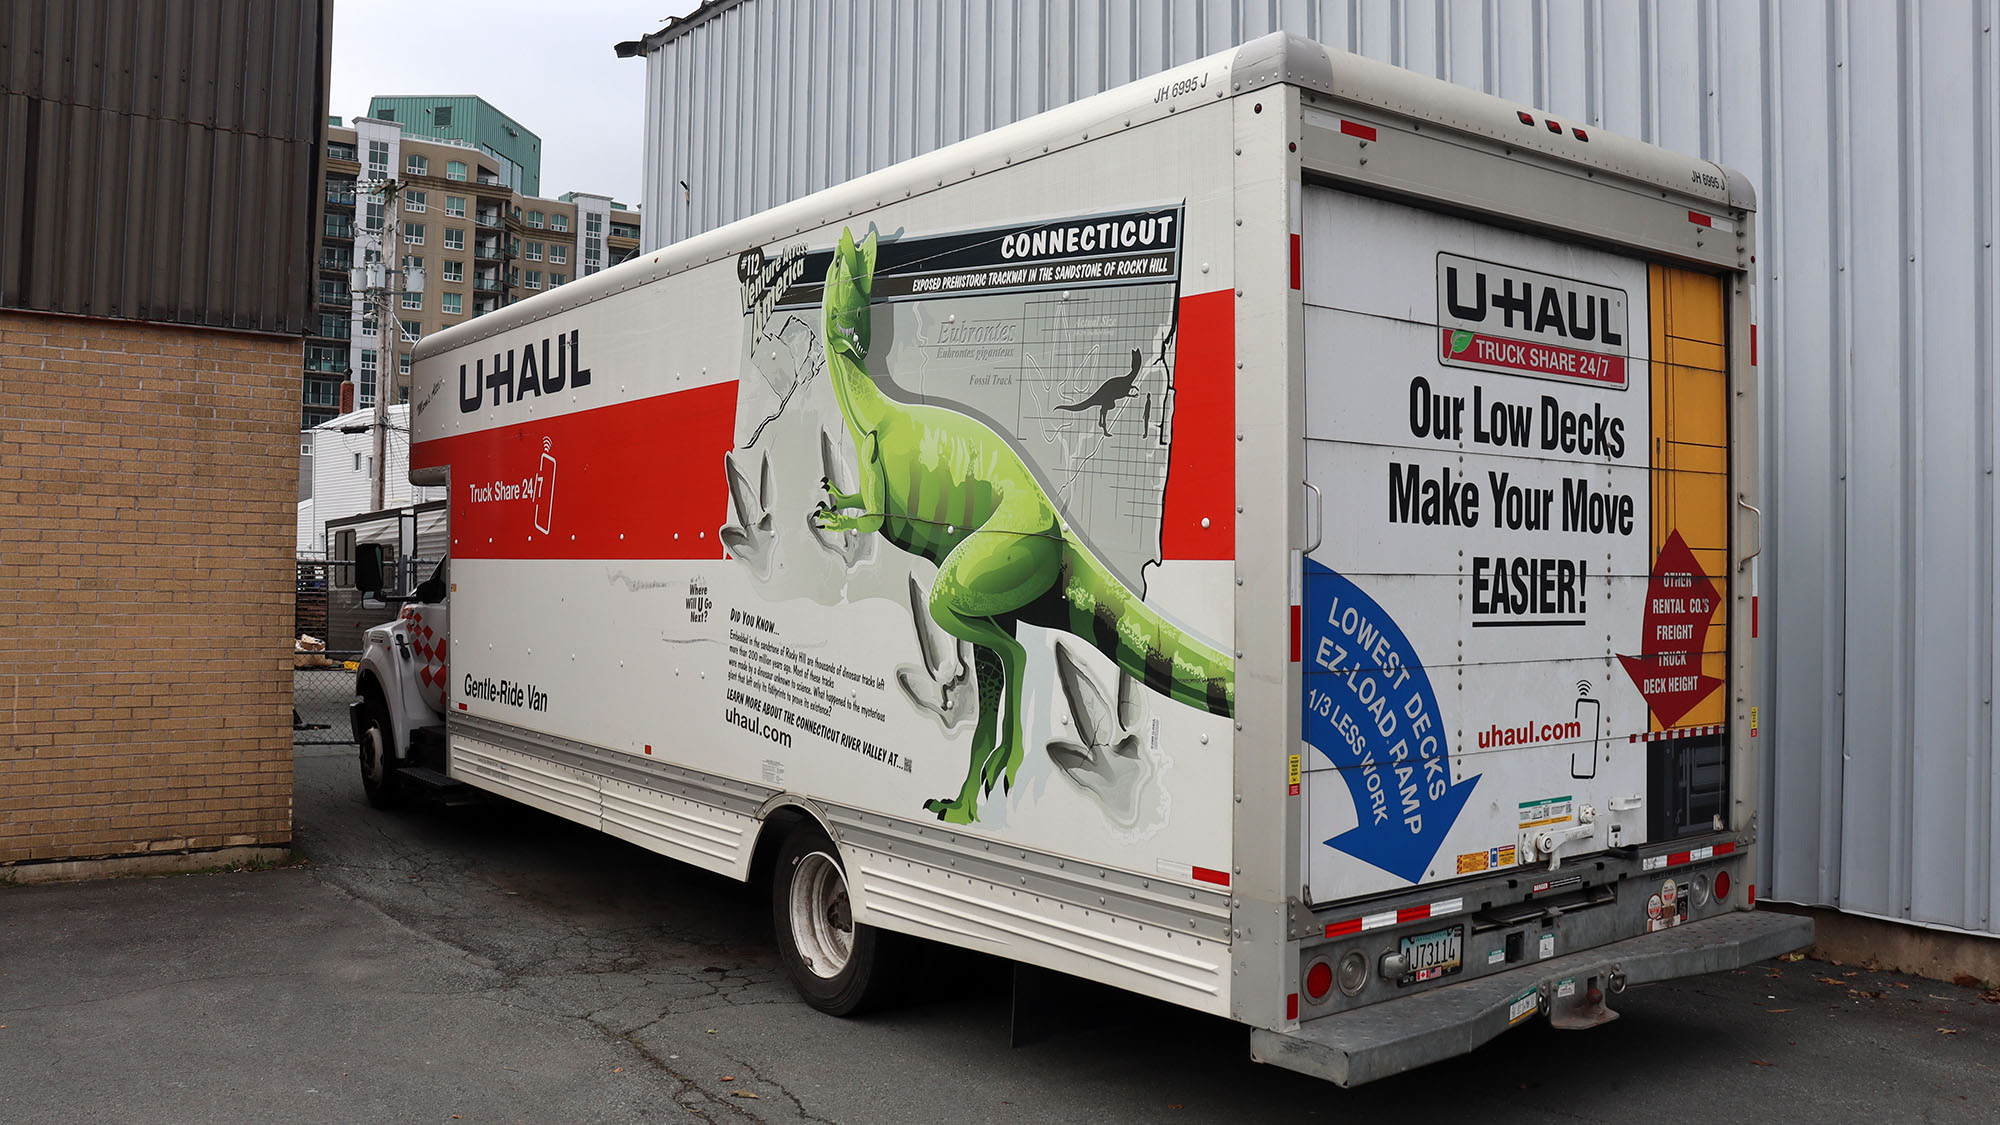 Shelter Movers uses companies like U-Haul to help their clients escape domestic abuse.